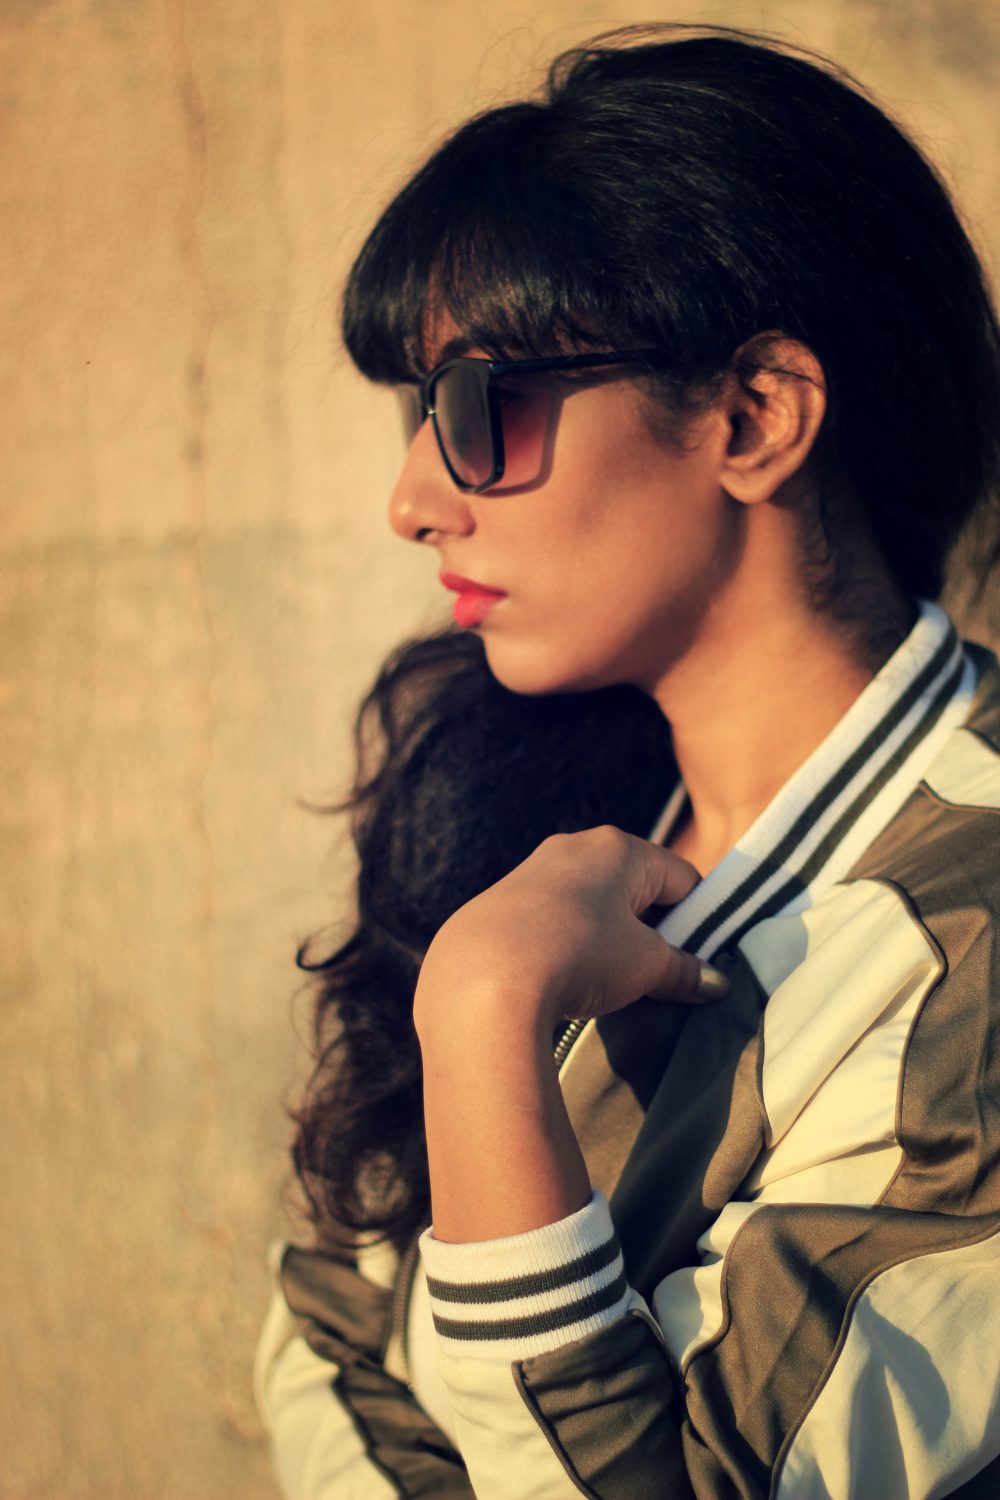  Lookbook ; Conceptual ; fashion photography ; Max Fashion ; Bomber Jacket ; vintage ; pop of colors ; quirky; red lips ; messy hair ; strong ; winter fashion ; winter outfit ; street style ; street fashion ; Dark ; Naznin ; hyderabad fashion bloggers ; hyderabad bloggers ; hyderabad fashion blogger ; I Dress for the Applause ; 